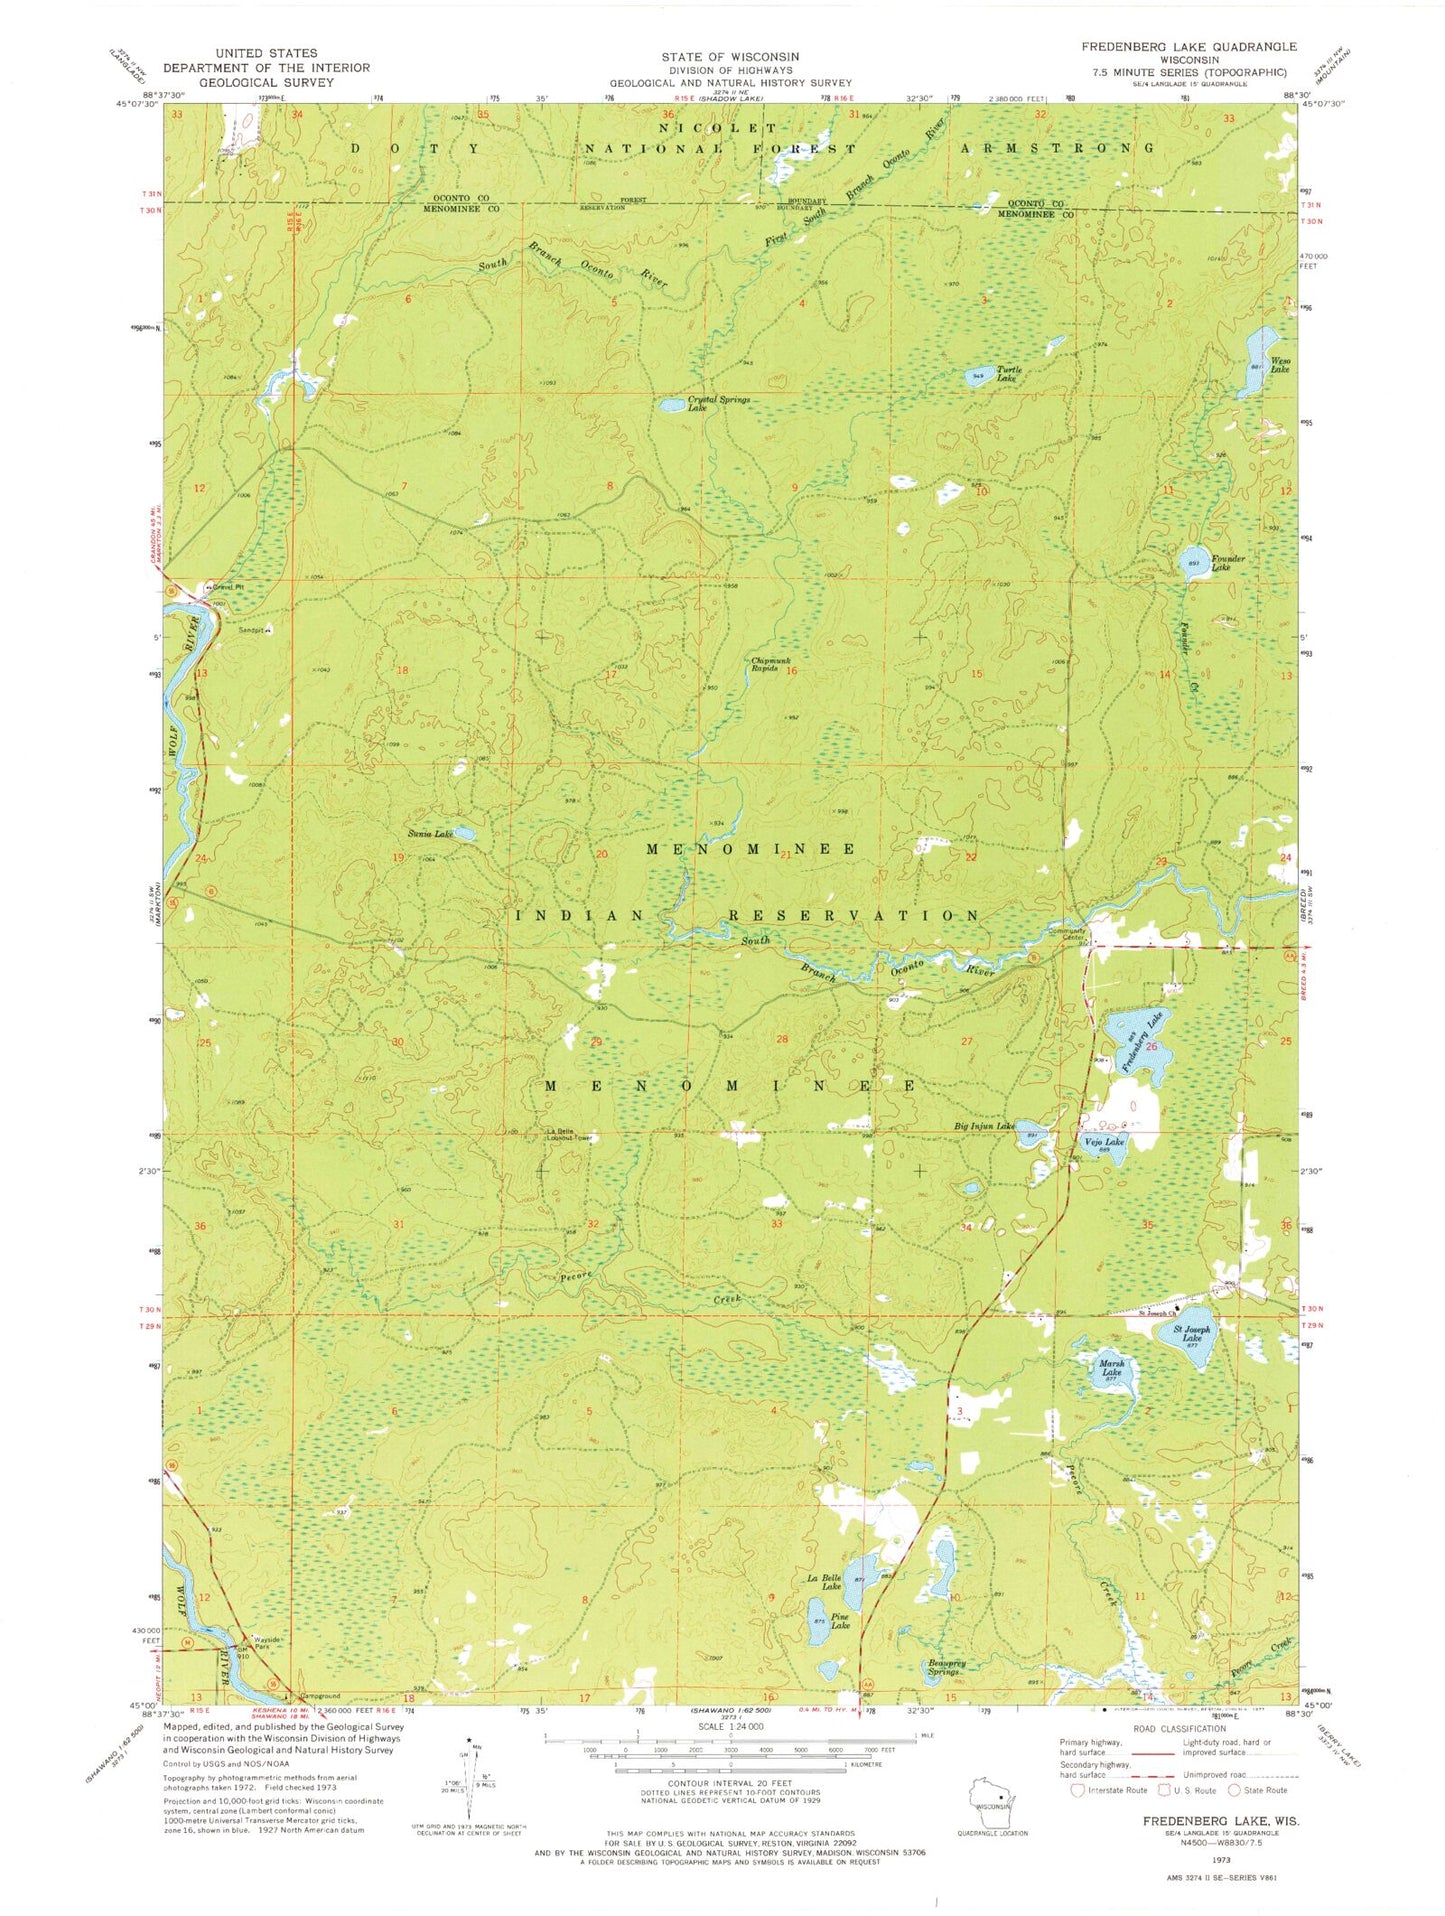 Classic USGS Fredenberg Lake Wisconsin 7.5'x7.5' Topo Map Image